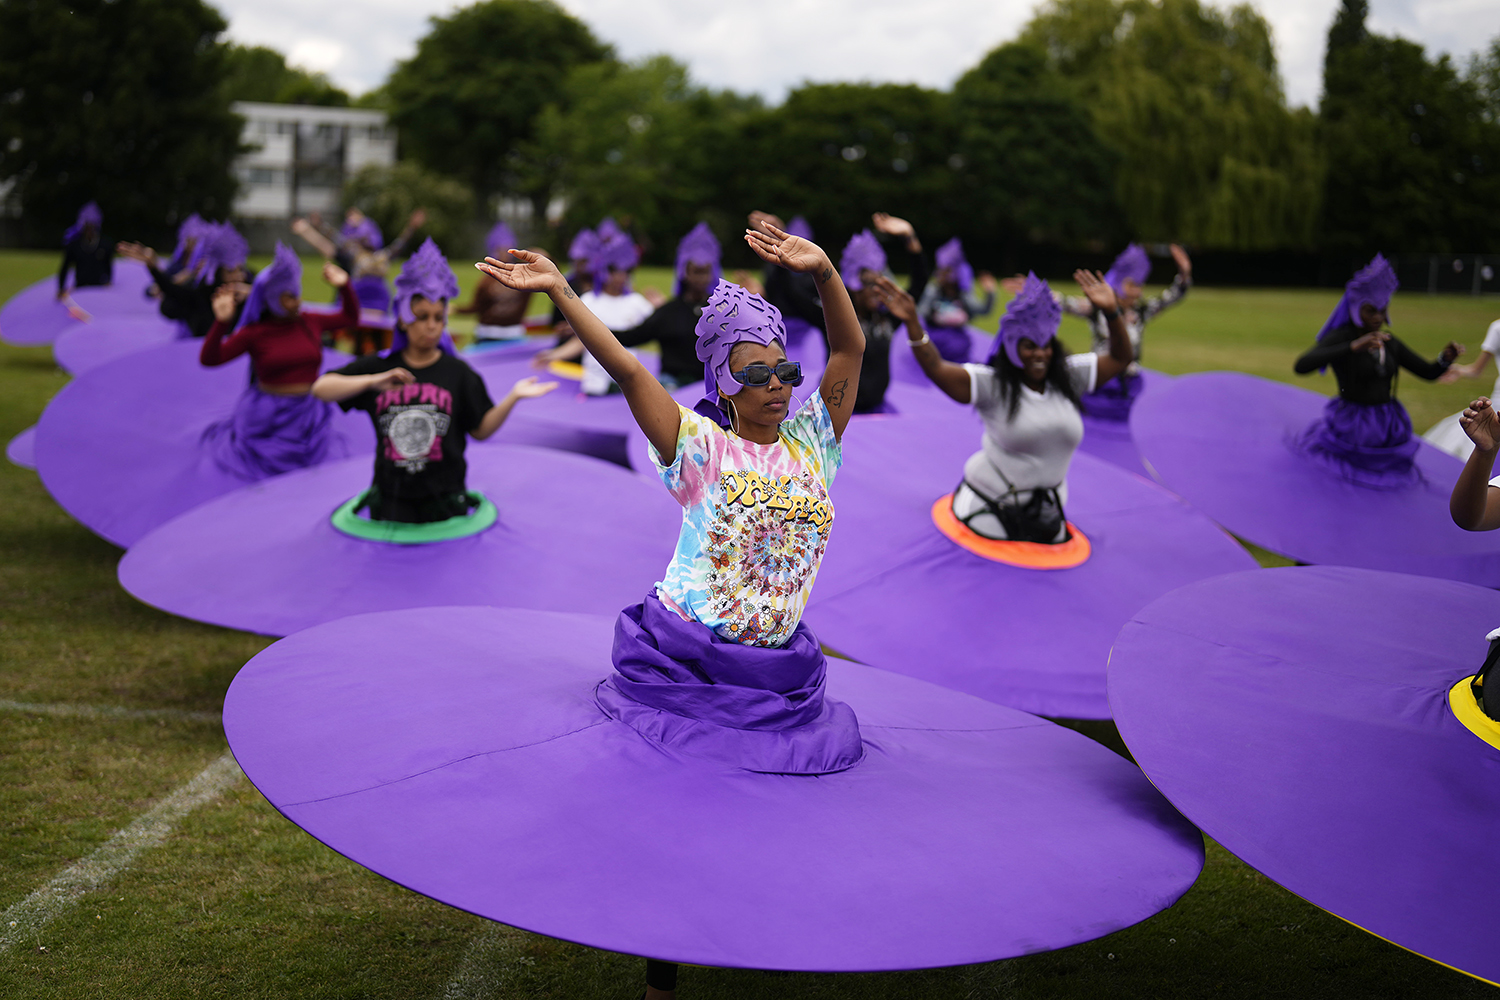 Members of the Mahogany carnival group take part in a rehearsal for their upcoming performance at the Platinum Jubilee Pageant, at Queens Park Community School, in north London, Saturday, May 28, 2022. Britain is getting ready for a party featuring mounted troops, solemn prayers — and a pack of dancing mechanical corgis. The nation will celebrate Queen Elizabeth II’s 70 years on the throne this week with four days of pomp and pageantry in central London. (AP Photo/Matt Dunham)